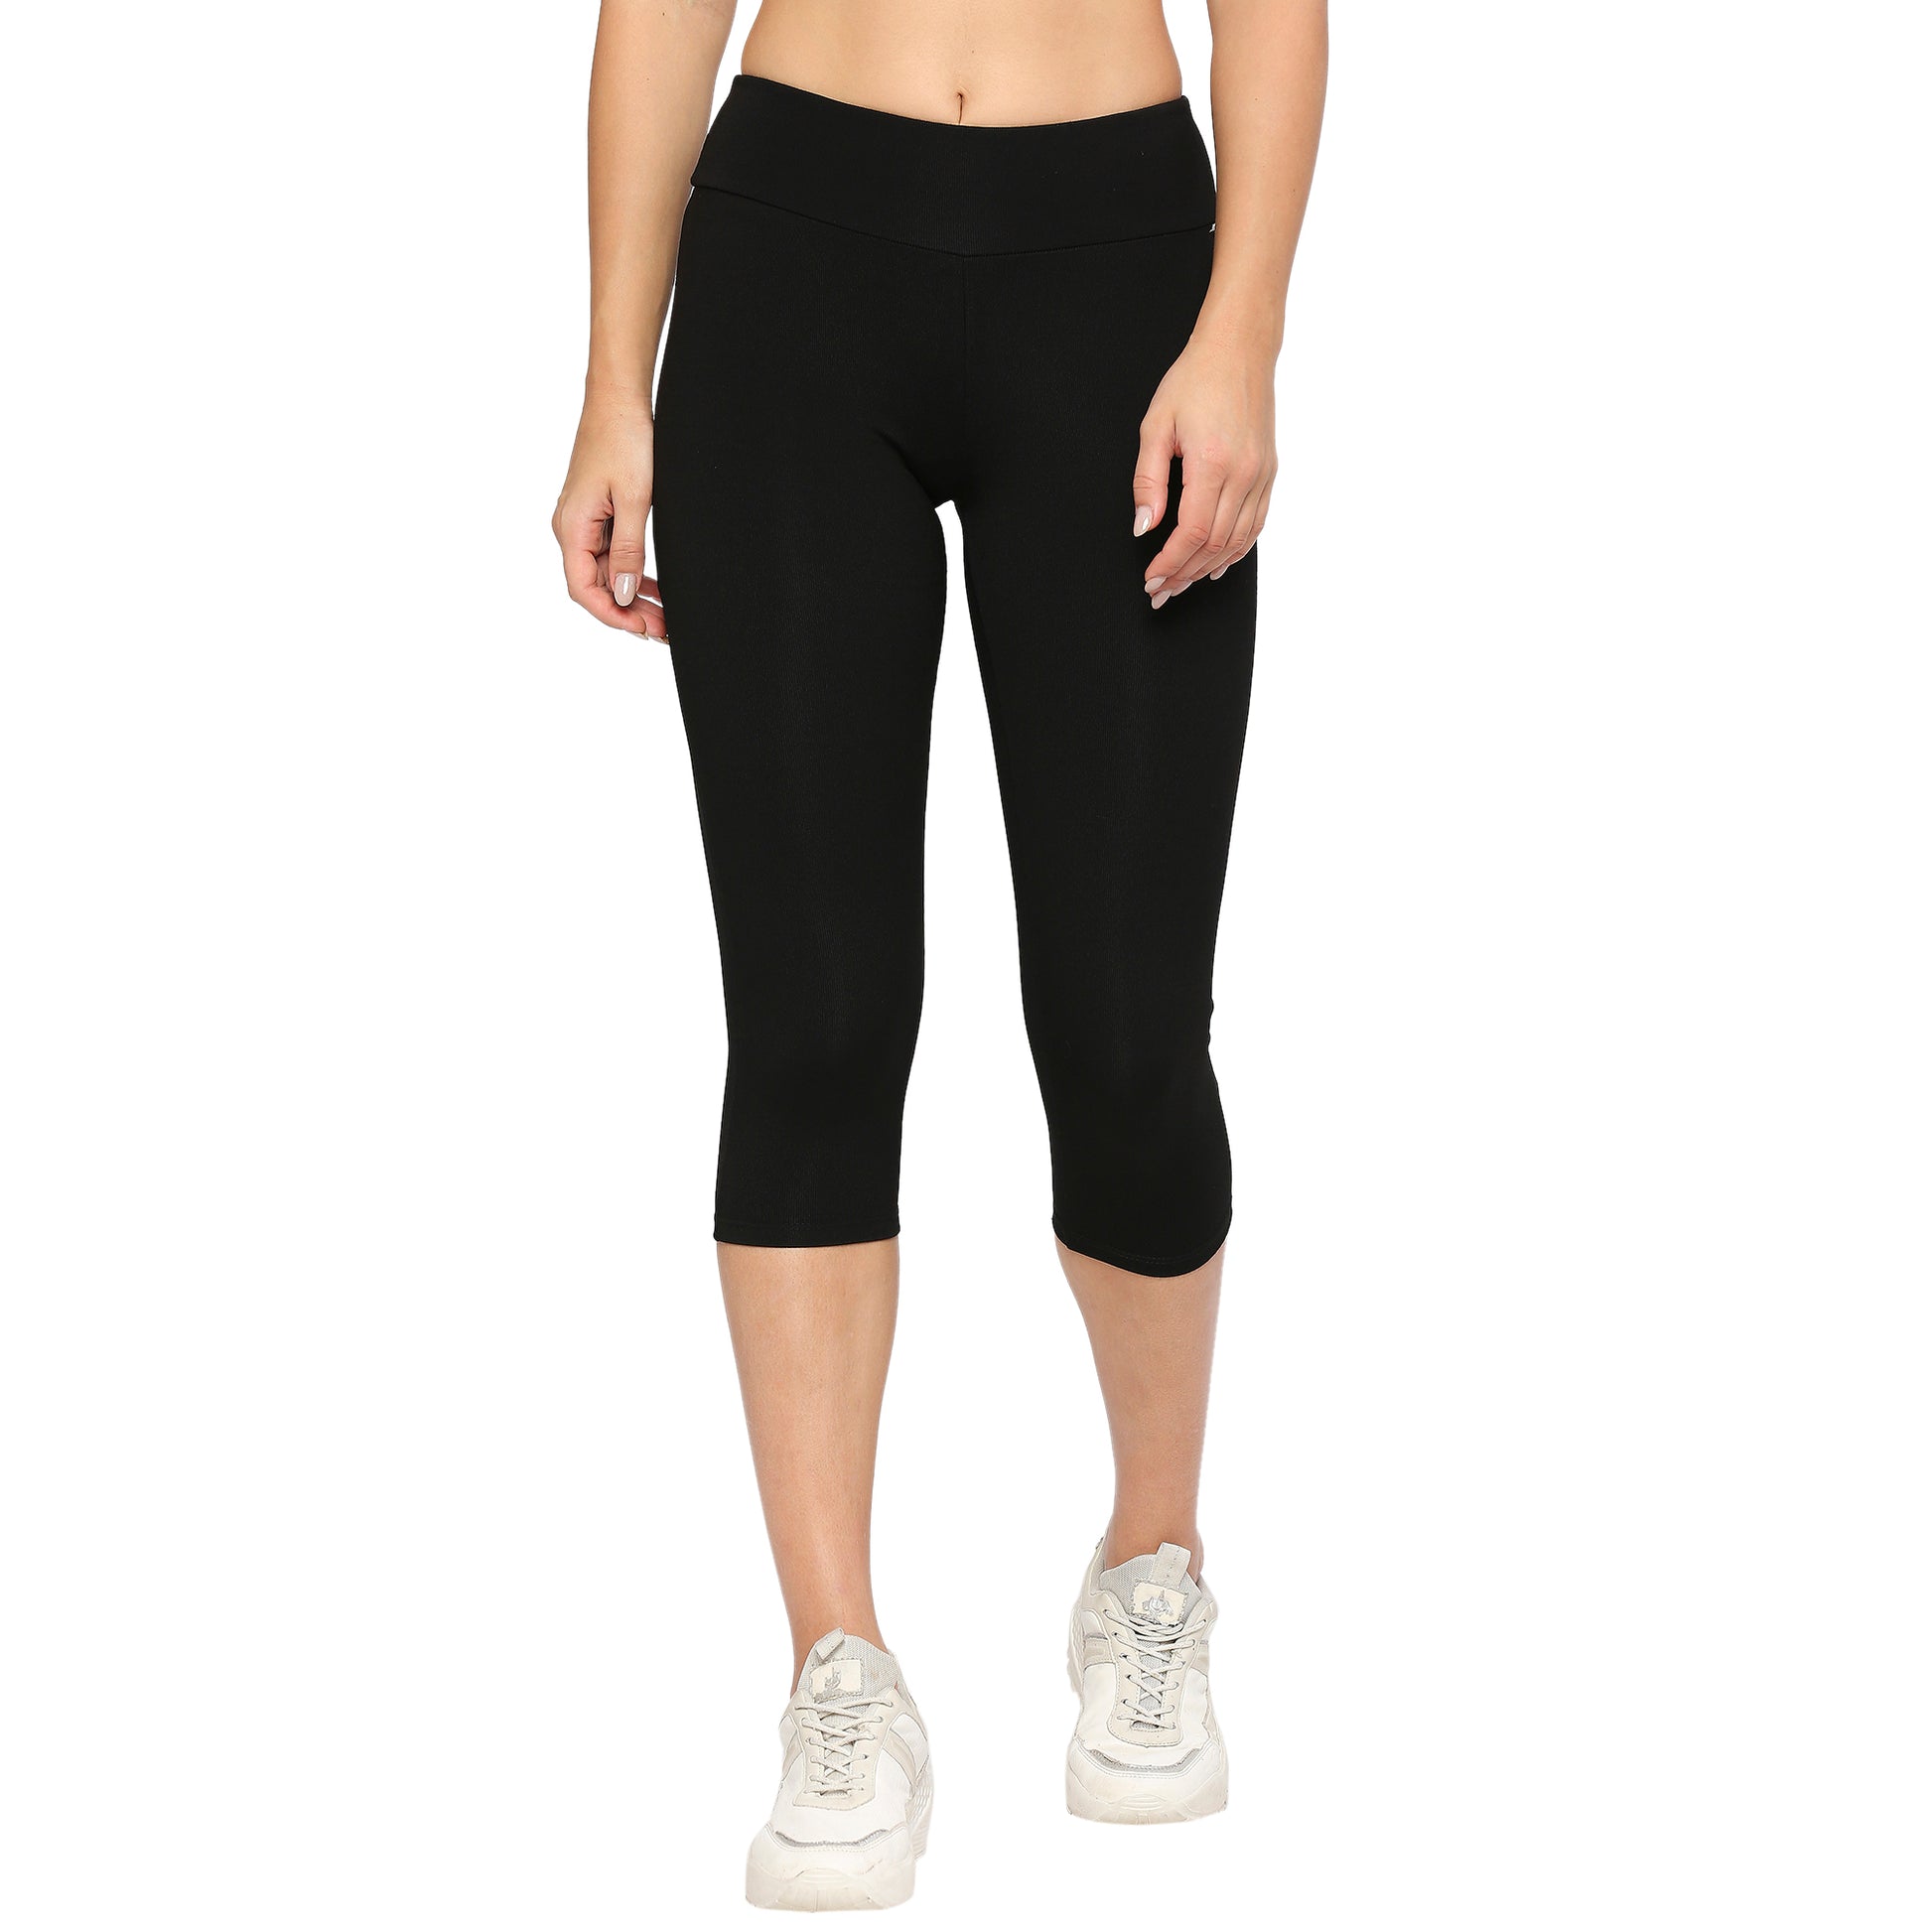 40% off LAPASA Women's Yoga Apparel from $11.40 + Delivery (Free